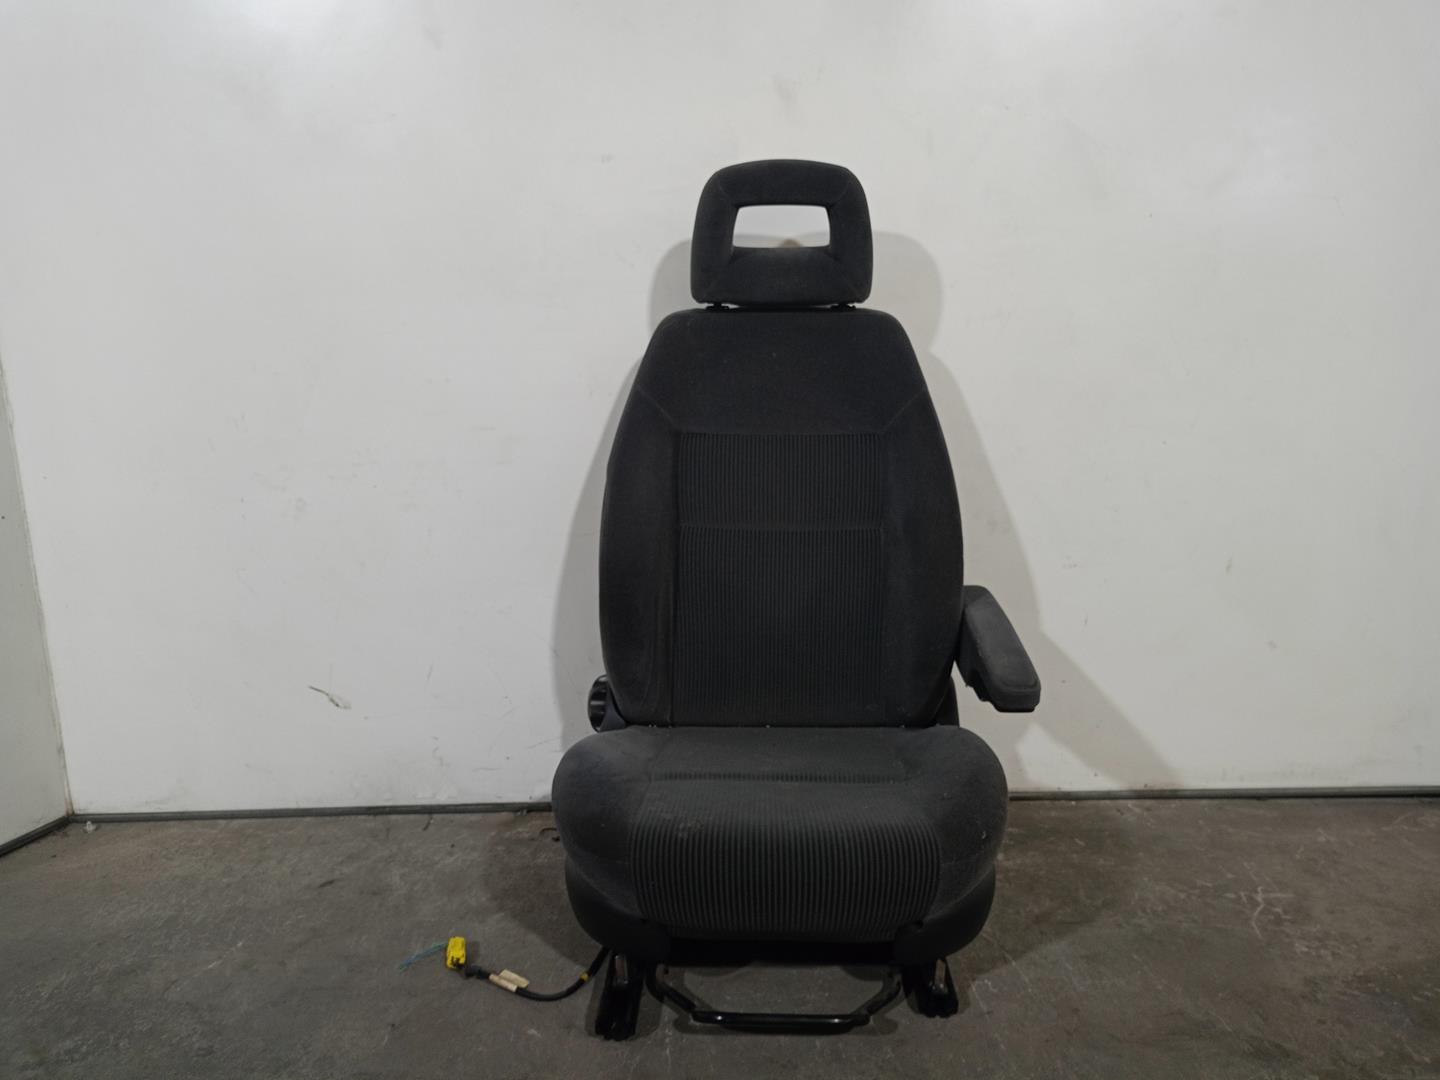 FORD GALAXY (WGR) Front Right Seat 1088667, TELANEGRA, 5PUERTAS 24551220